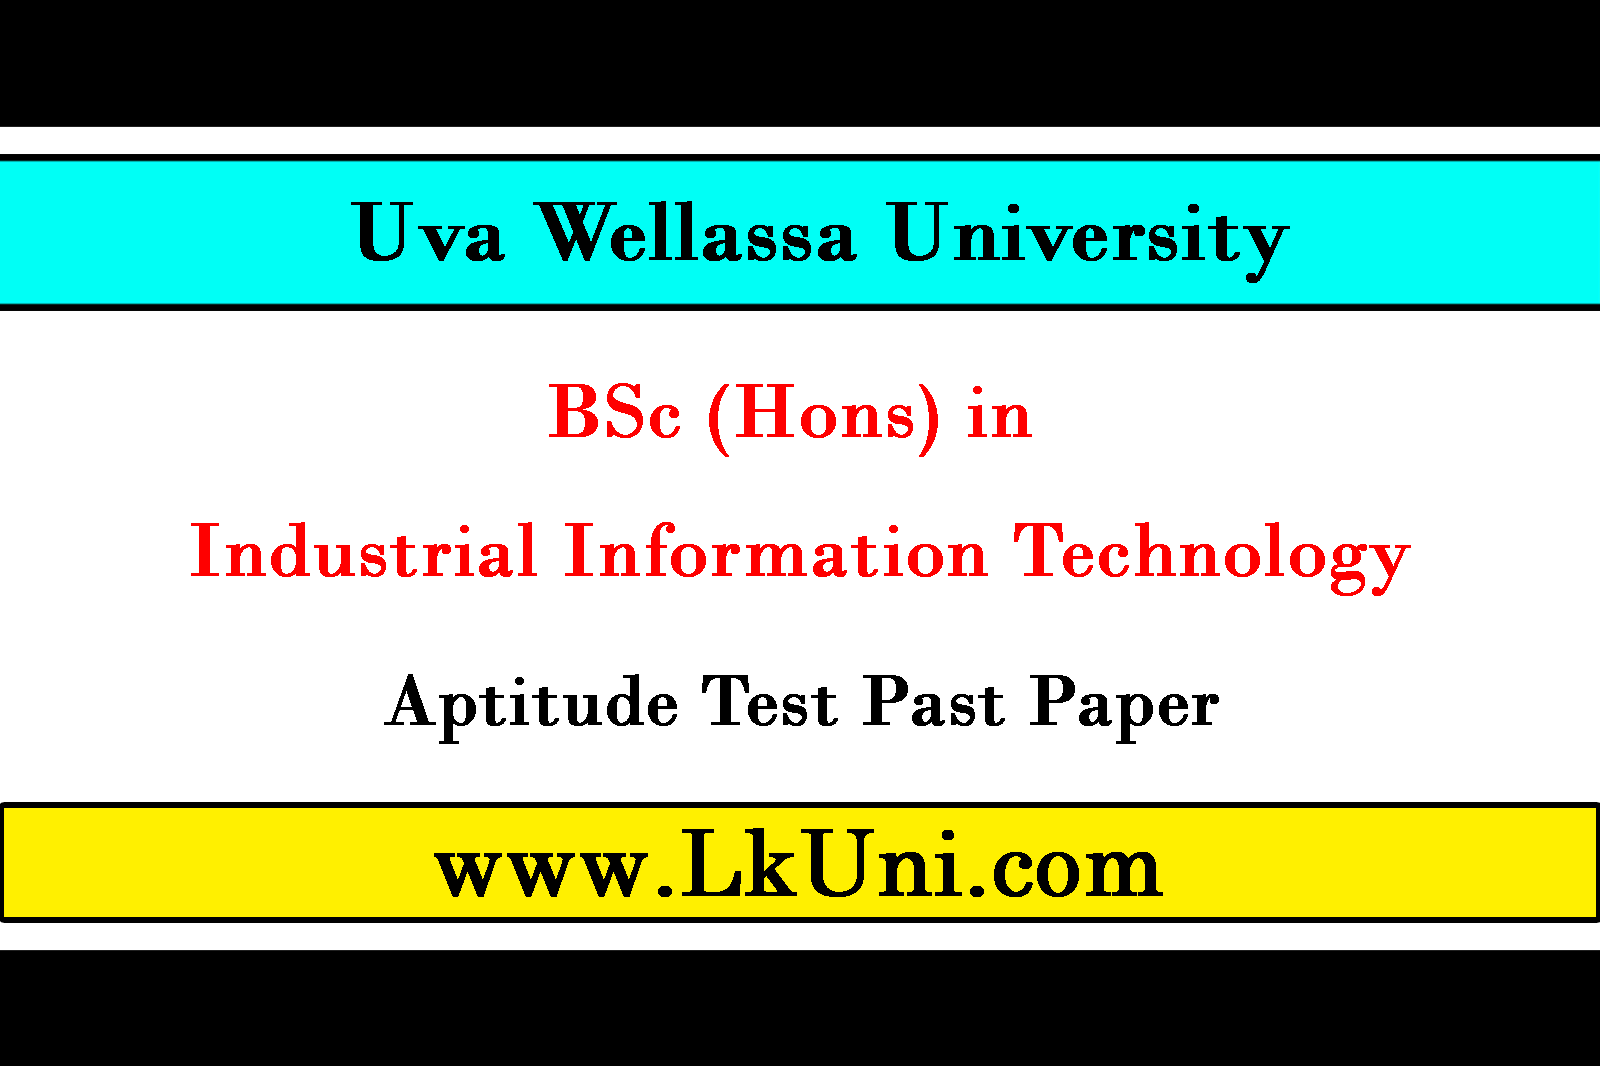 bsc-hons-in-industrial-information-technology-aptitude-test-past-papers-uva-wellassa